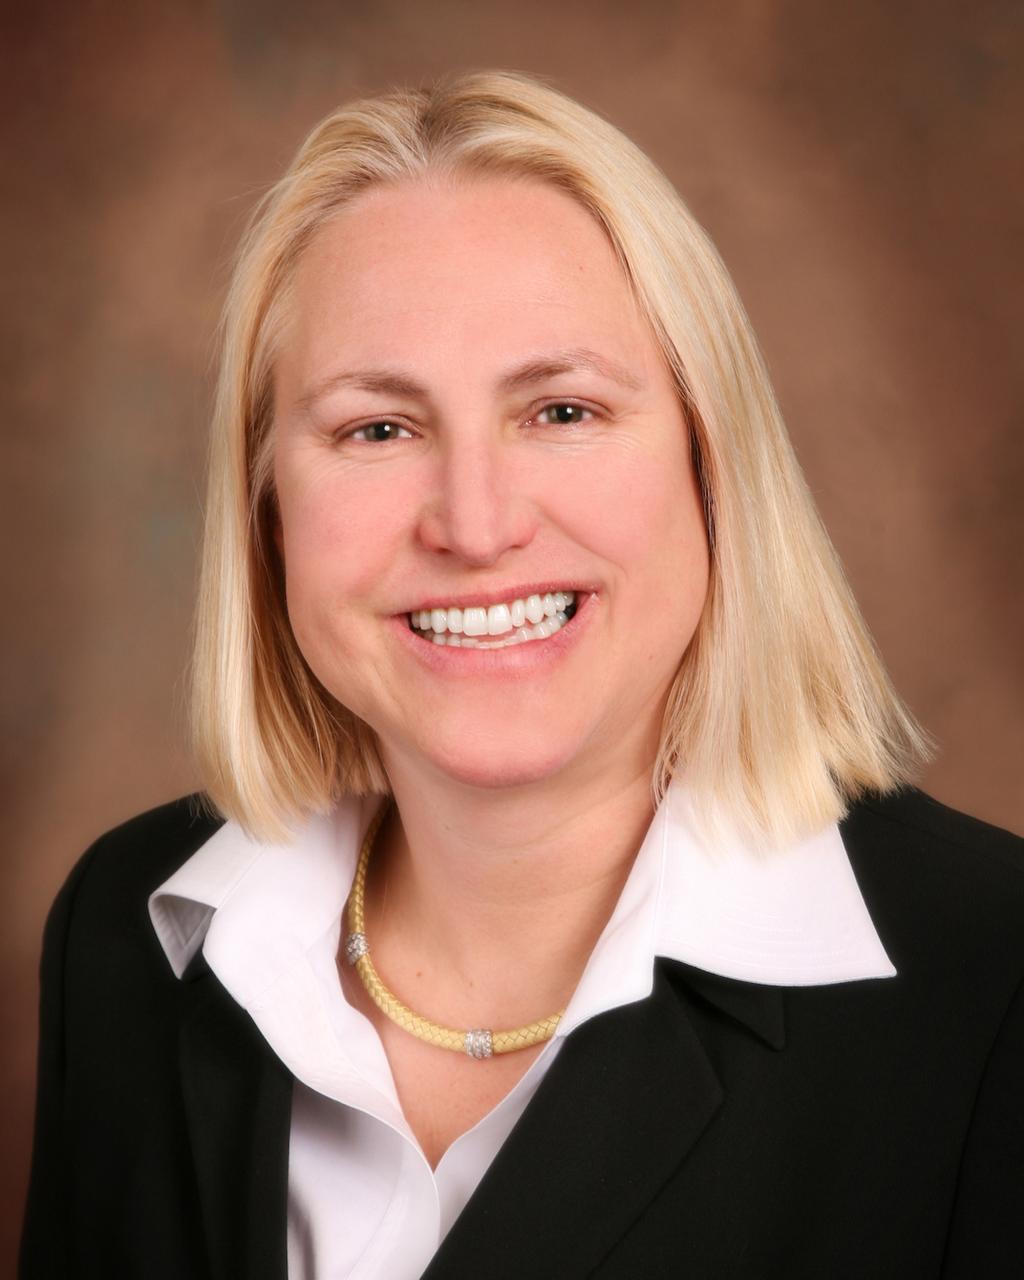 Karin Landry Karin is the Managing Partner of Spring Consulting Group, LLC, has more than 25 years of experience in the insurance, health care, risk financing, retirement and benefits industries.